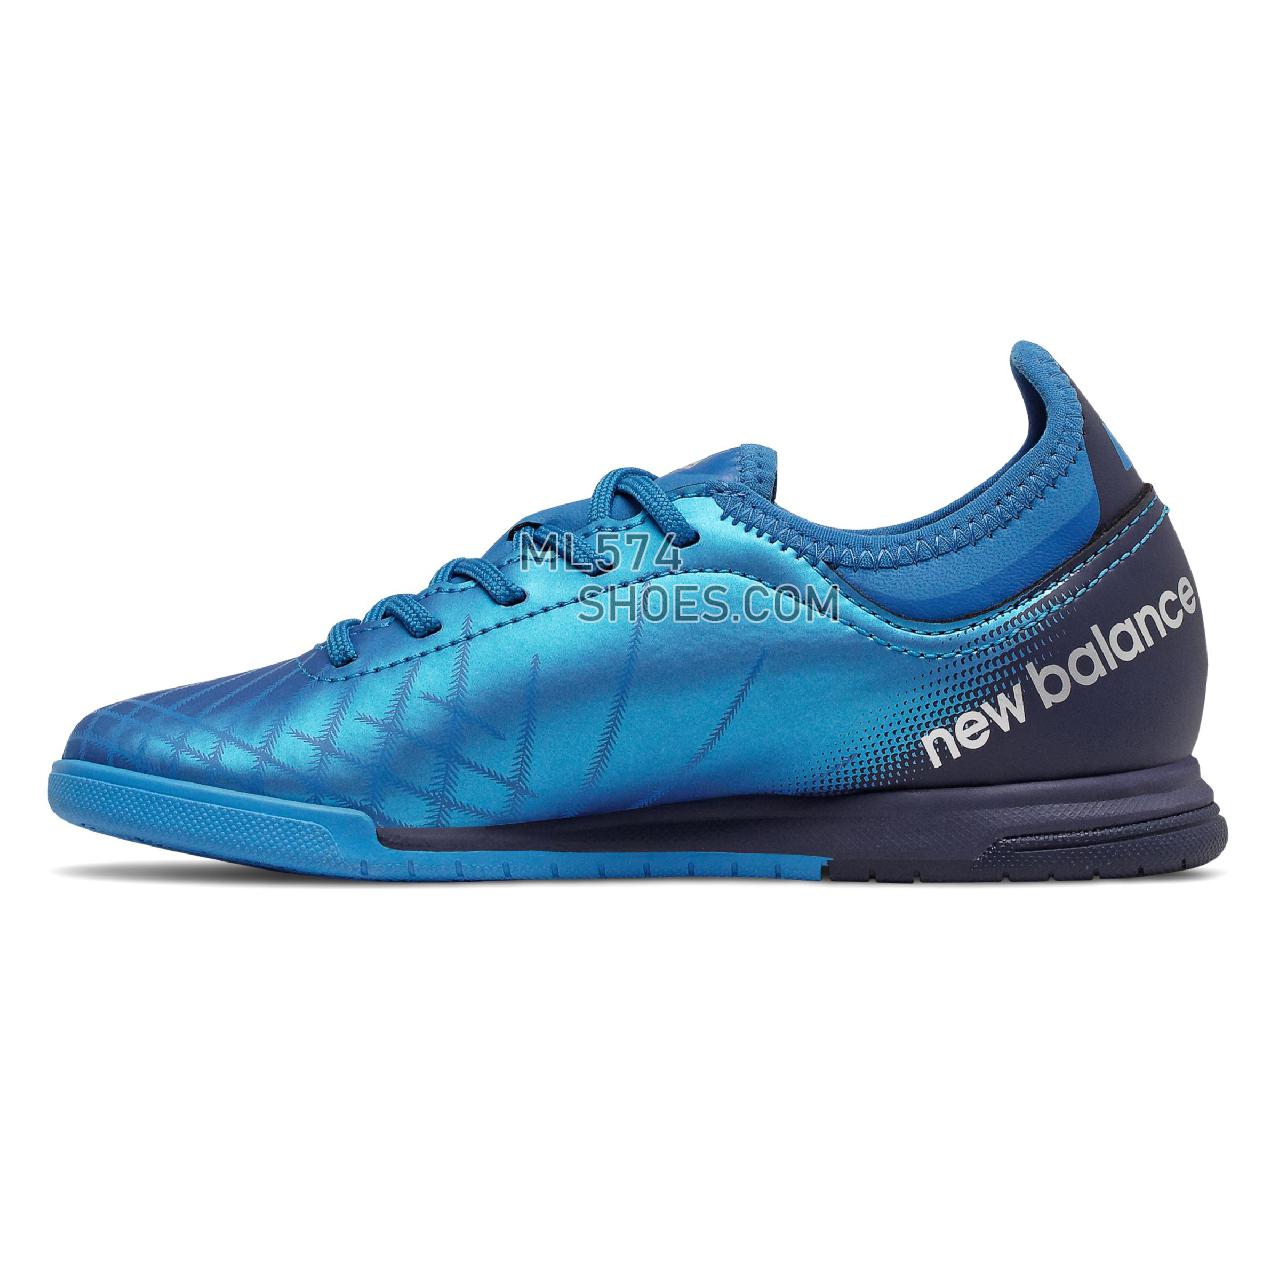 New Balance TEKELA V2 MAGIQUE JNR IN - Unisex Men's Women's Indoor FootBall Boots - Vision blue with neo classic blue and team navy - JSTTIVC2